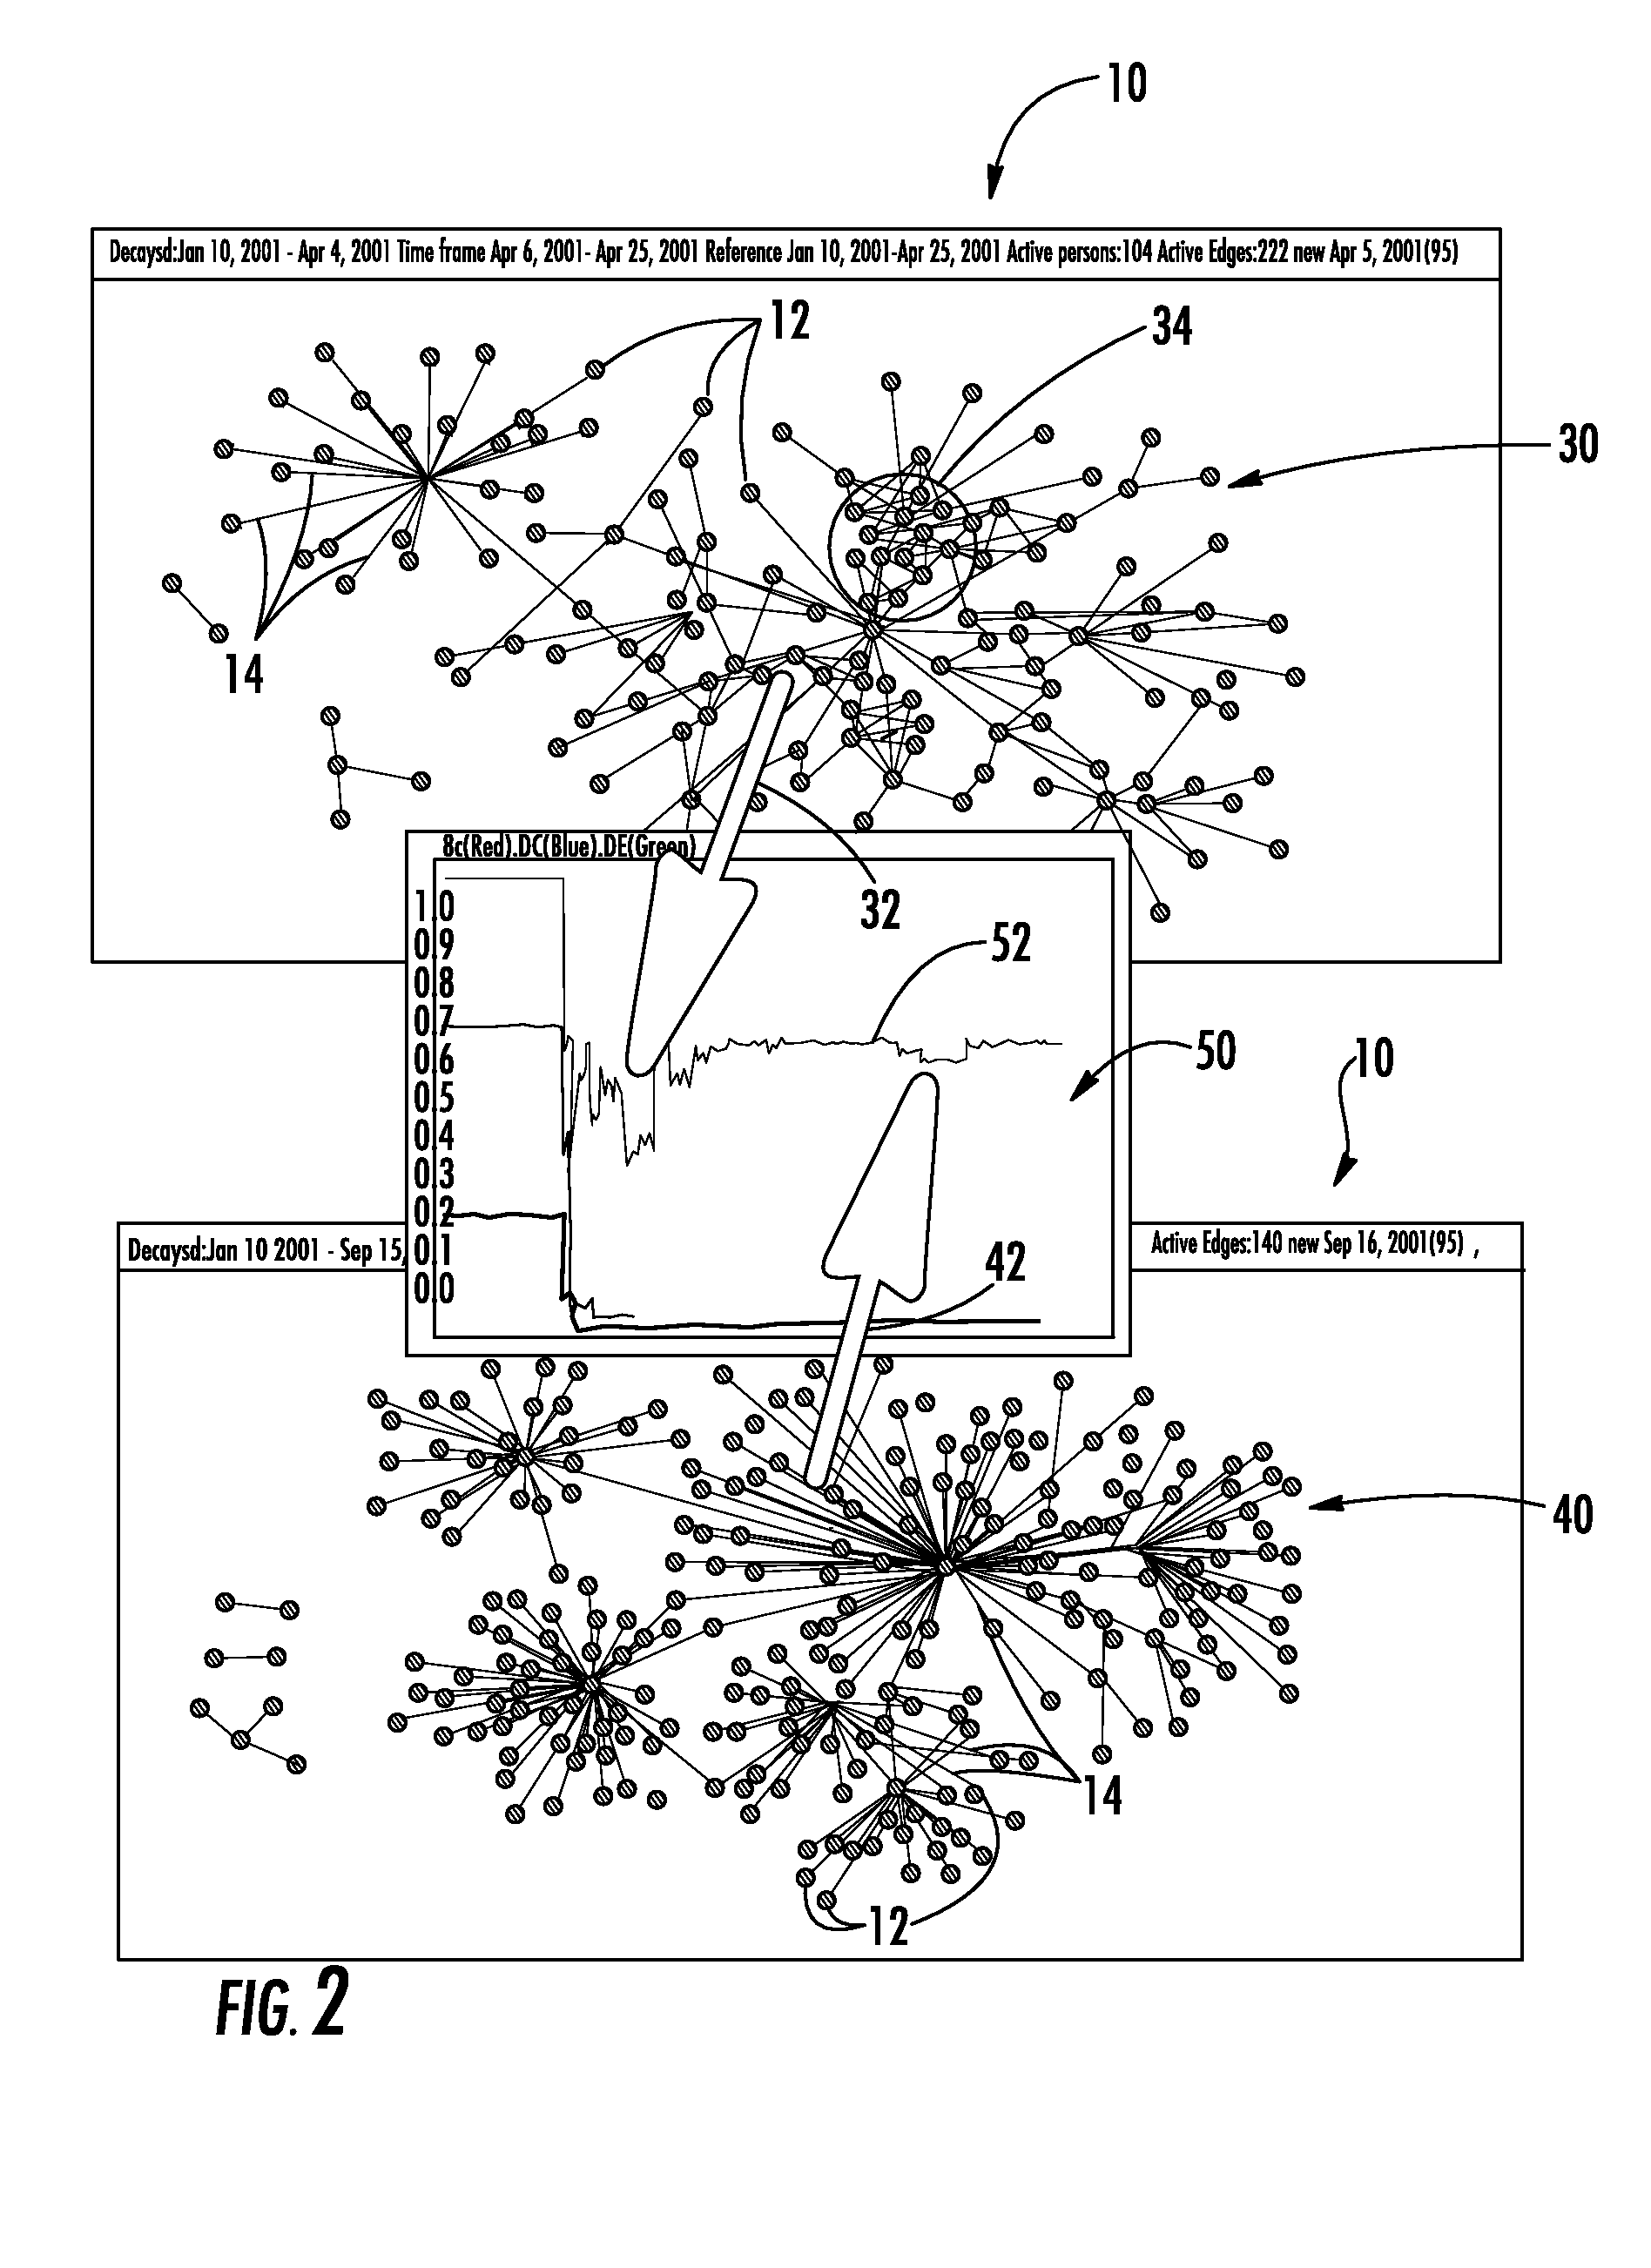 Temporal visualization algorithm for recognizing and optimizing organizational structure